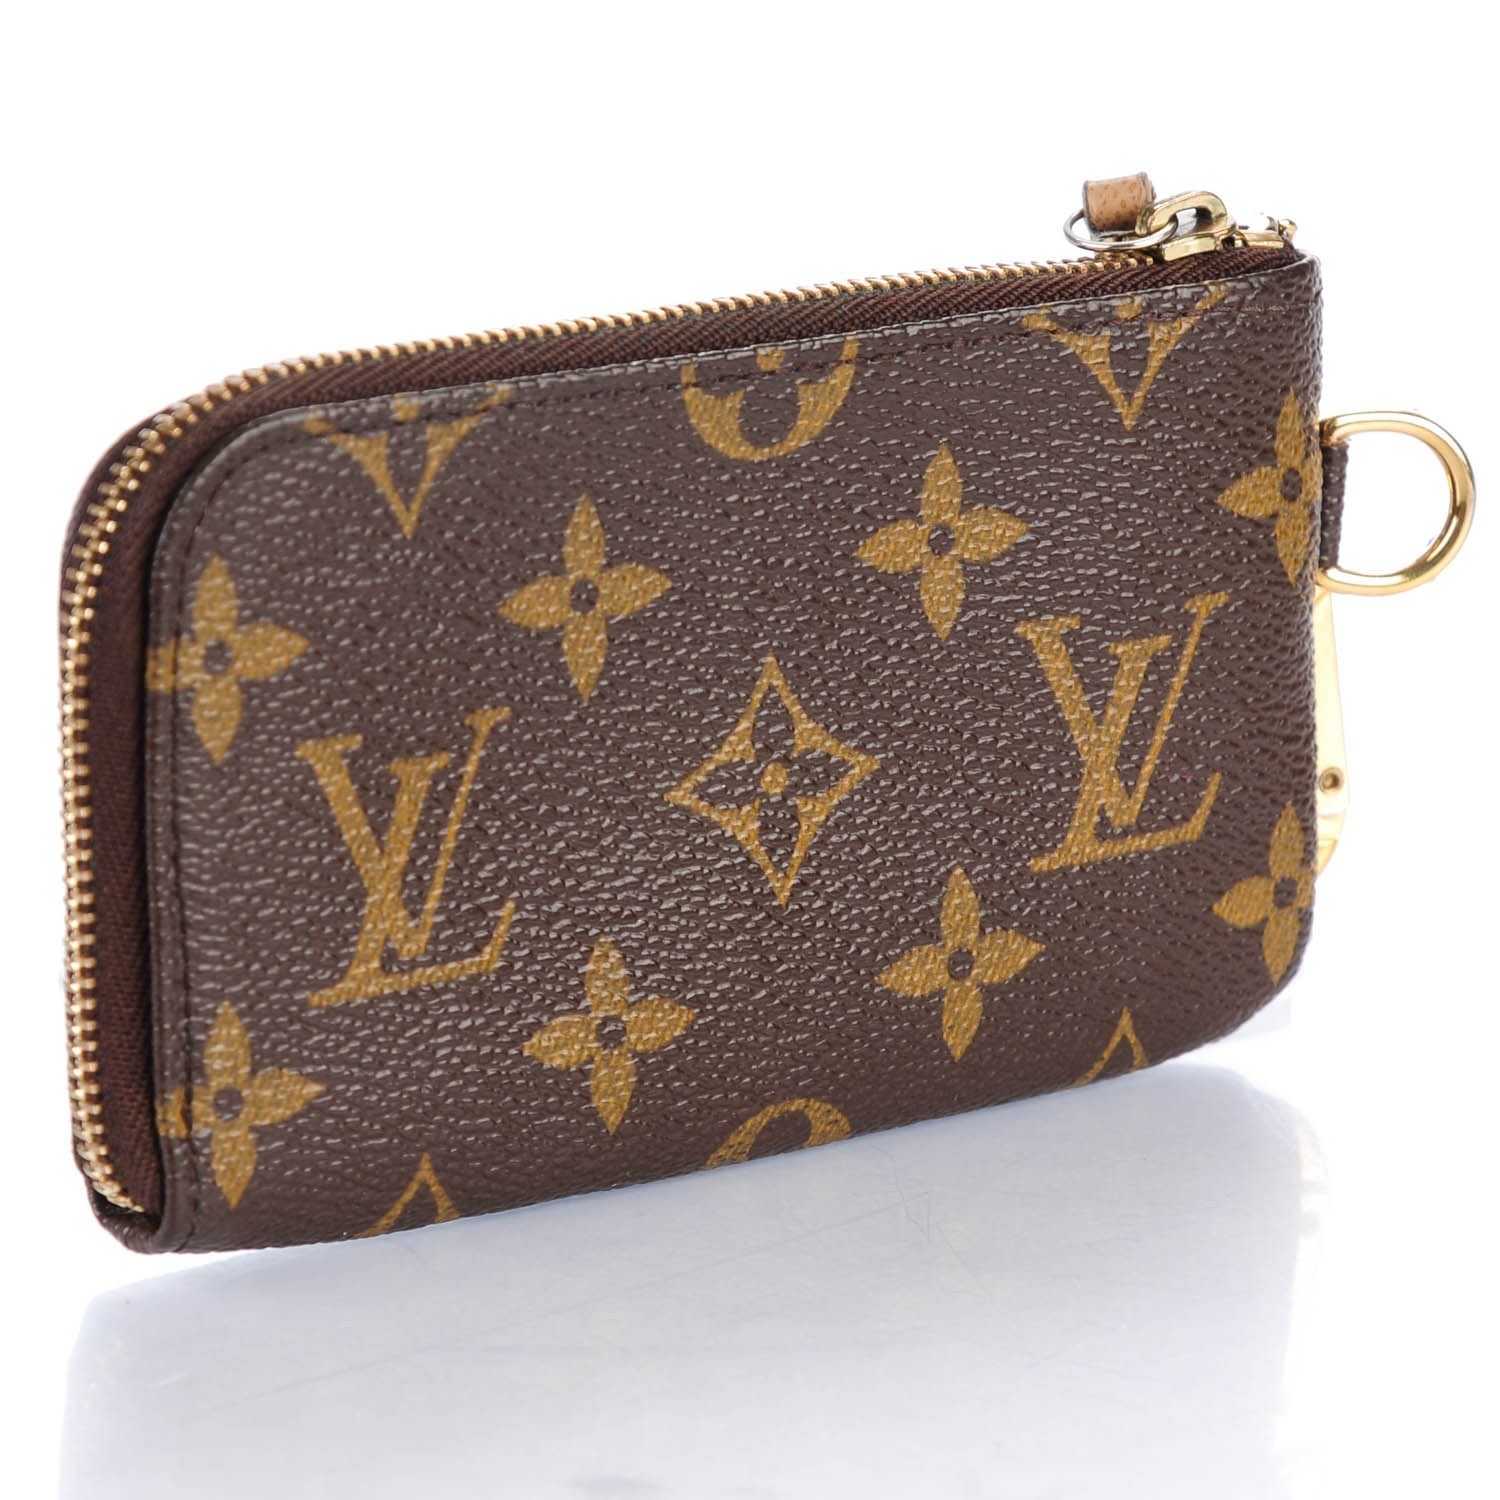 LOUIS VUITTON Monogram Complice Trunks and Bags Key Pouch 151704